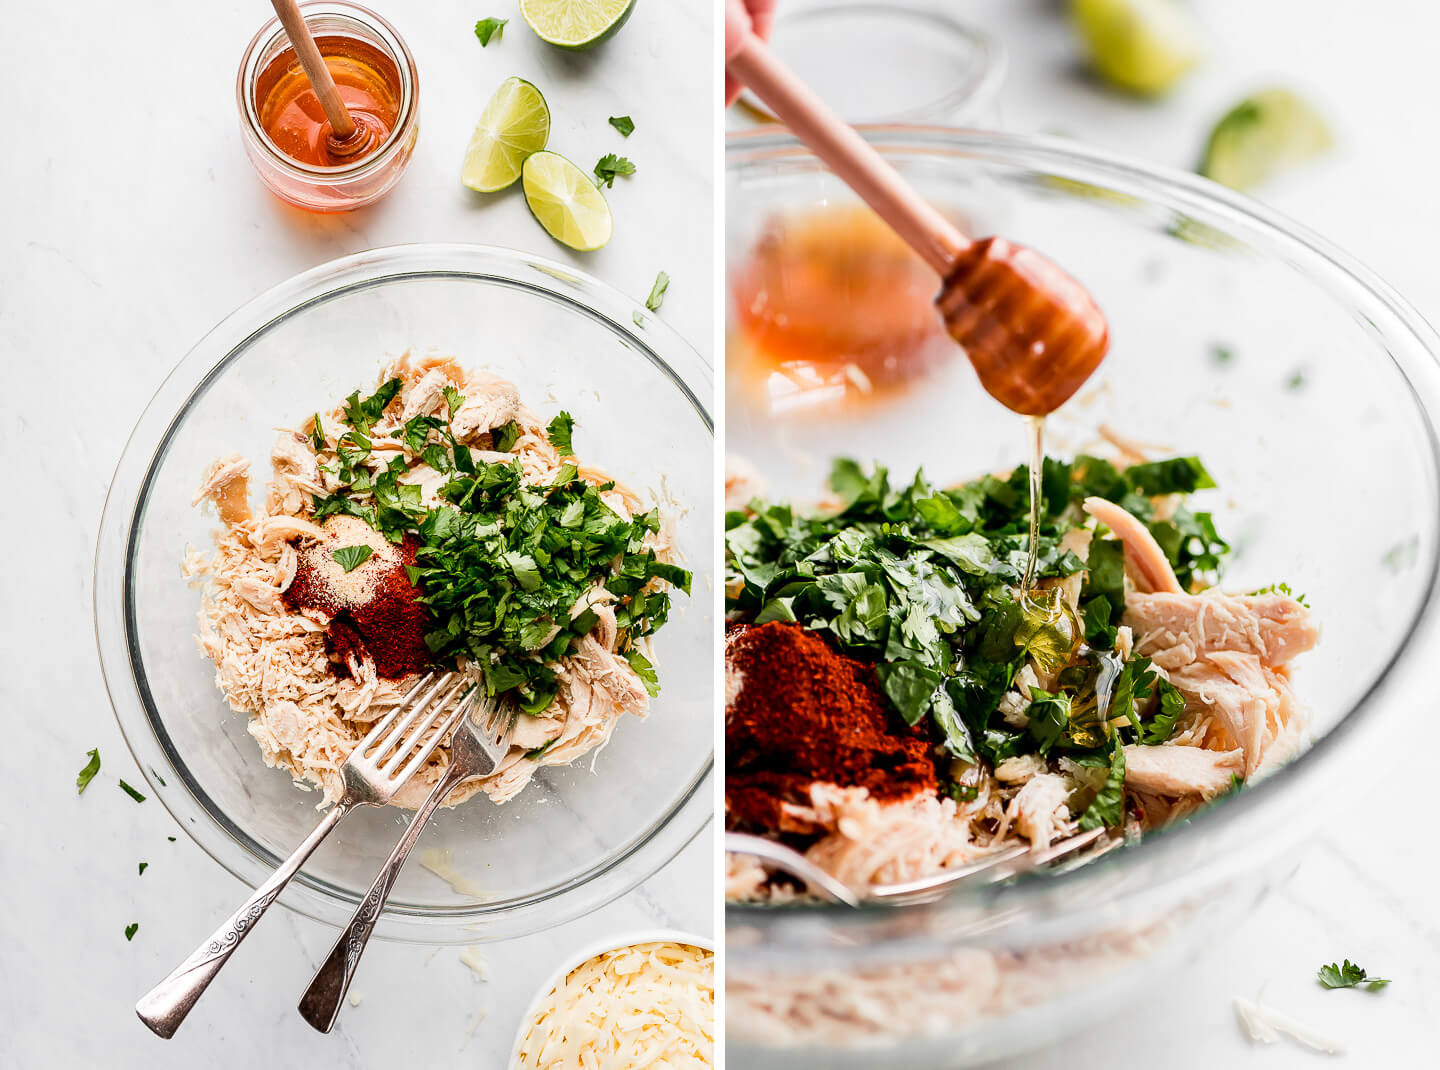 Diptych: A large mixing bowl with shredded chicken, cilantro, spices, and honey and lime to the side; drizzling honey over the contents in the mixing bowl.